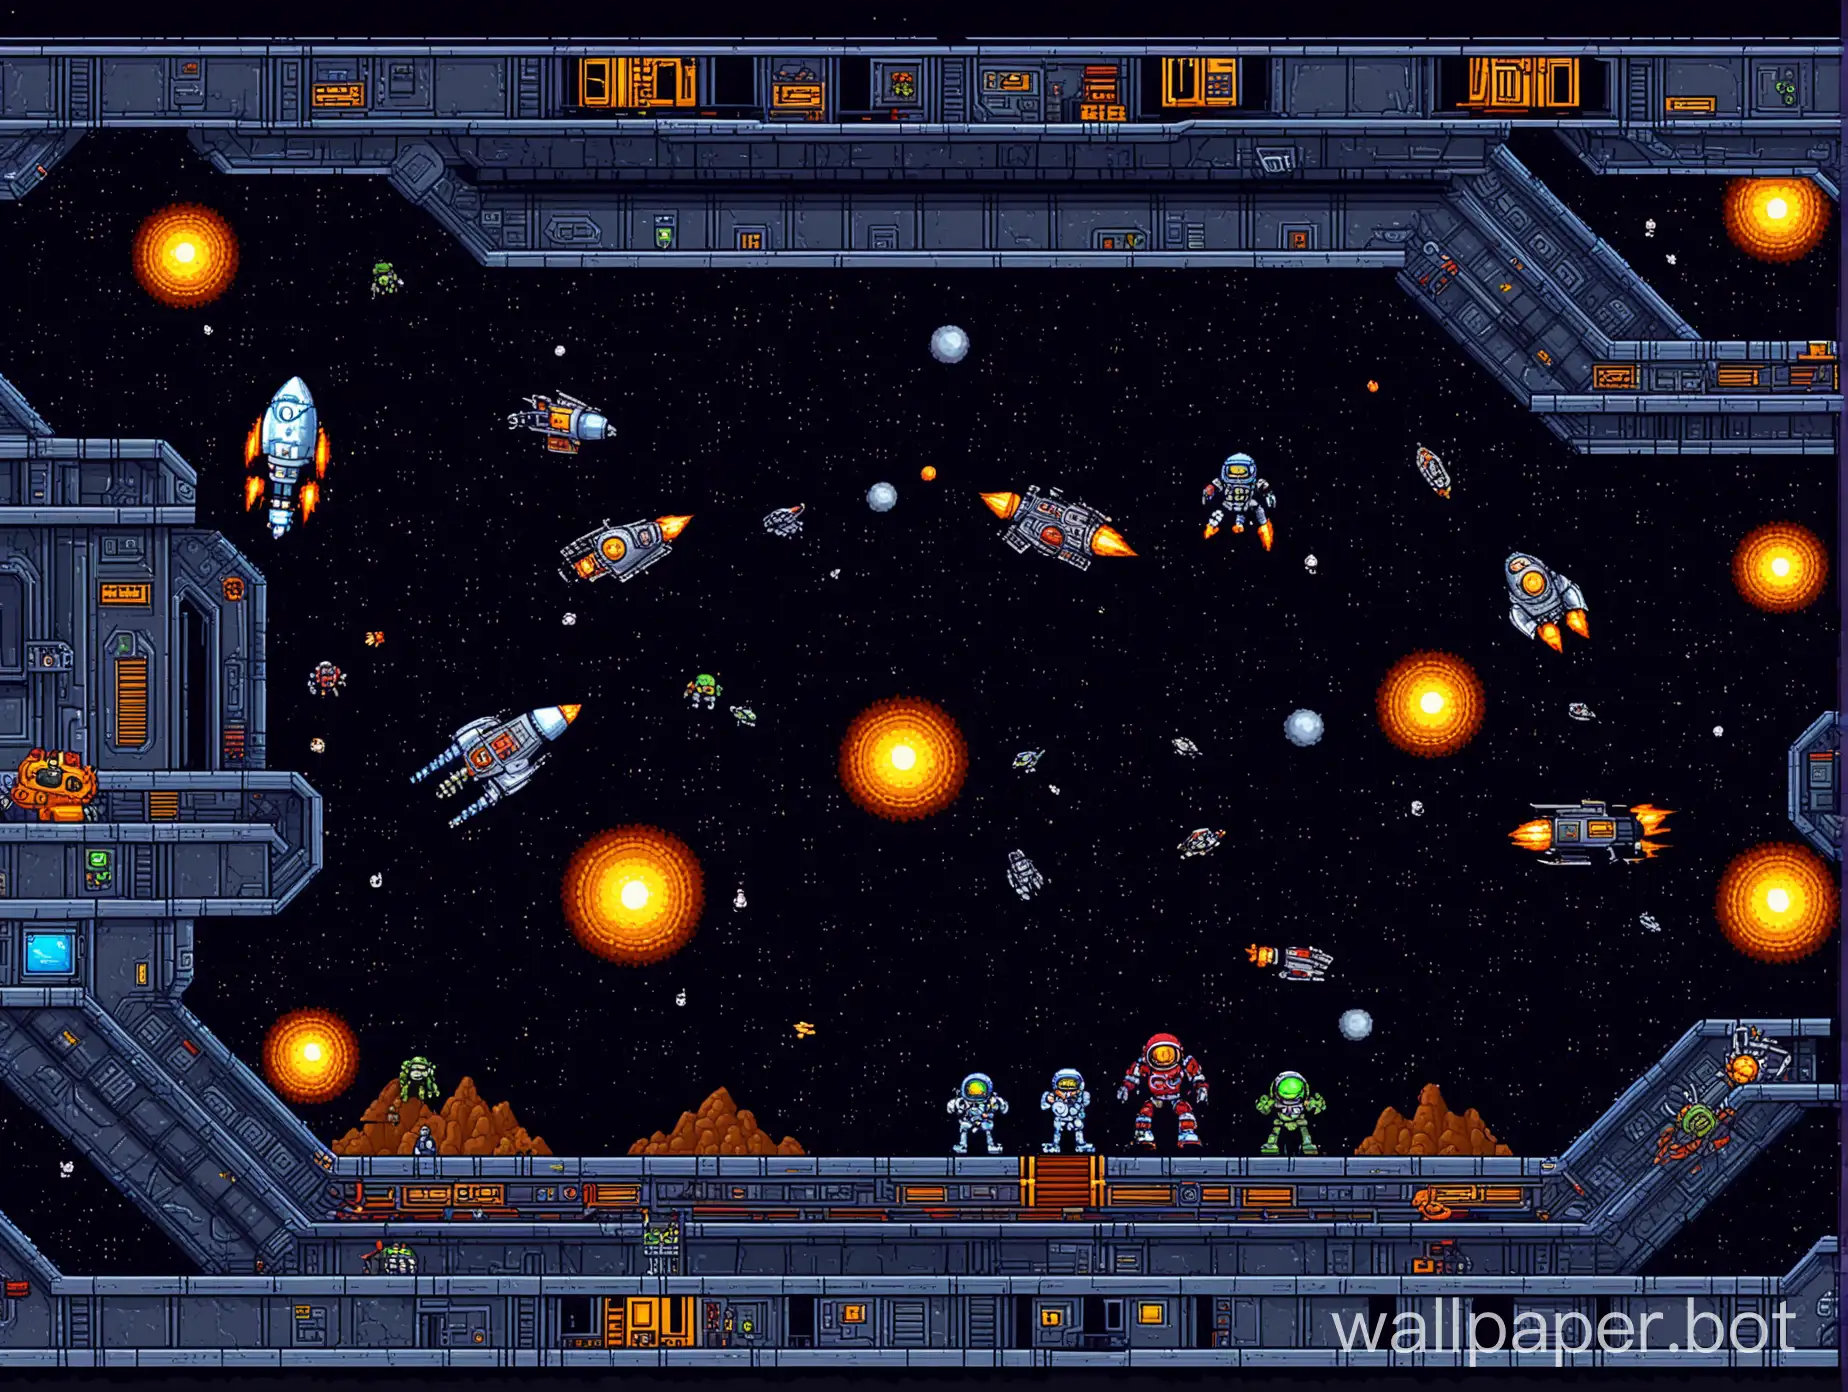 videogame shootemup sidescroller level, 2d, space futuristic, mission doom